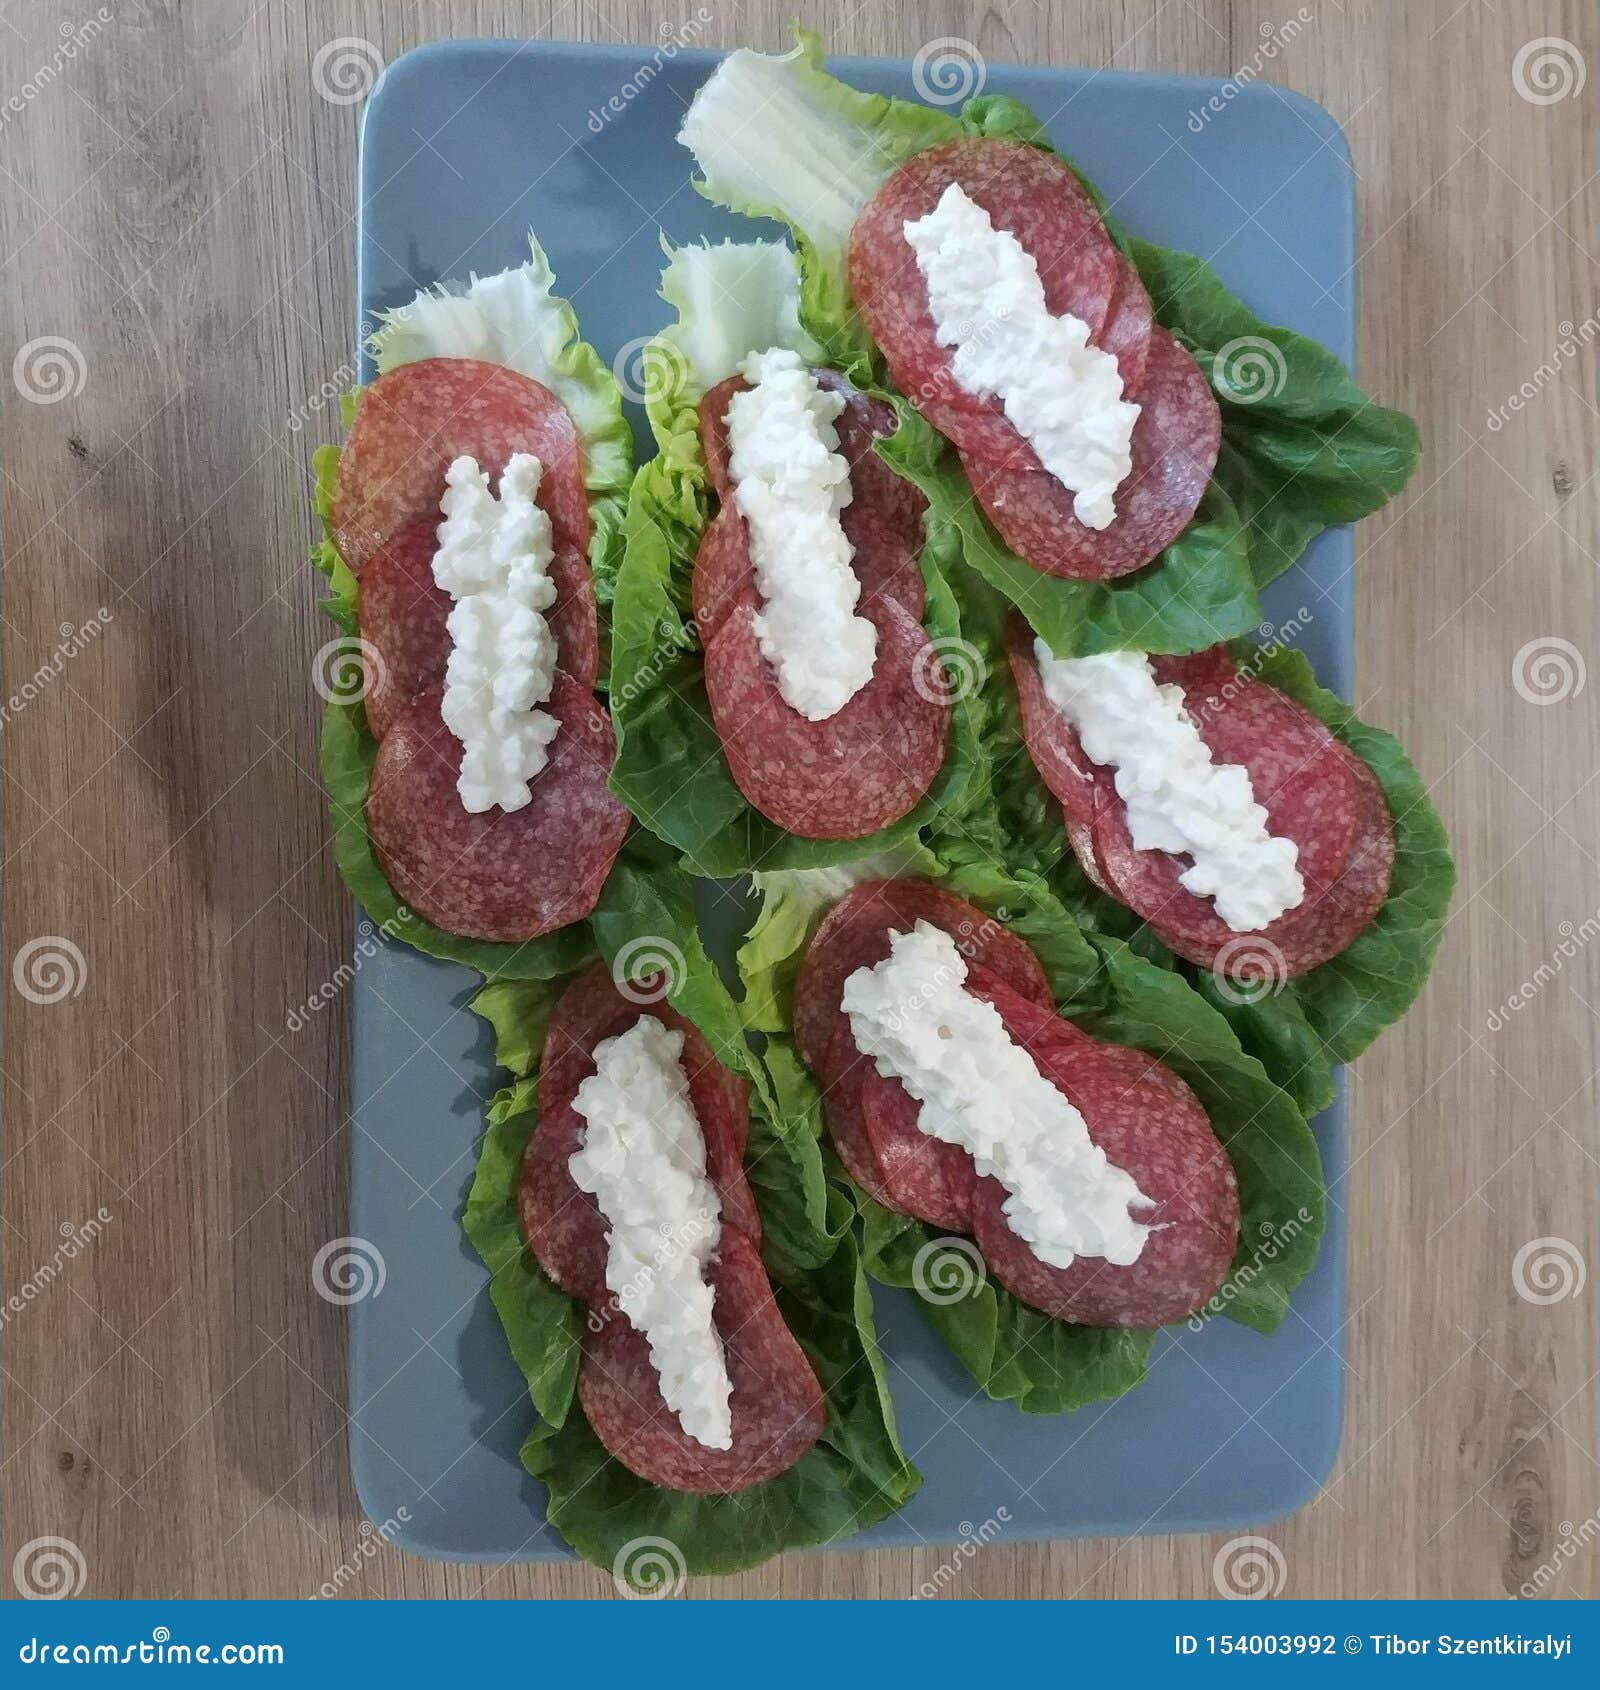 Ketogenic Meal Cottage Cheese With Salami And Lettuce Keto Food